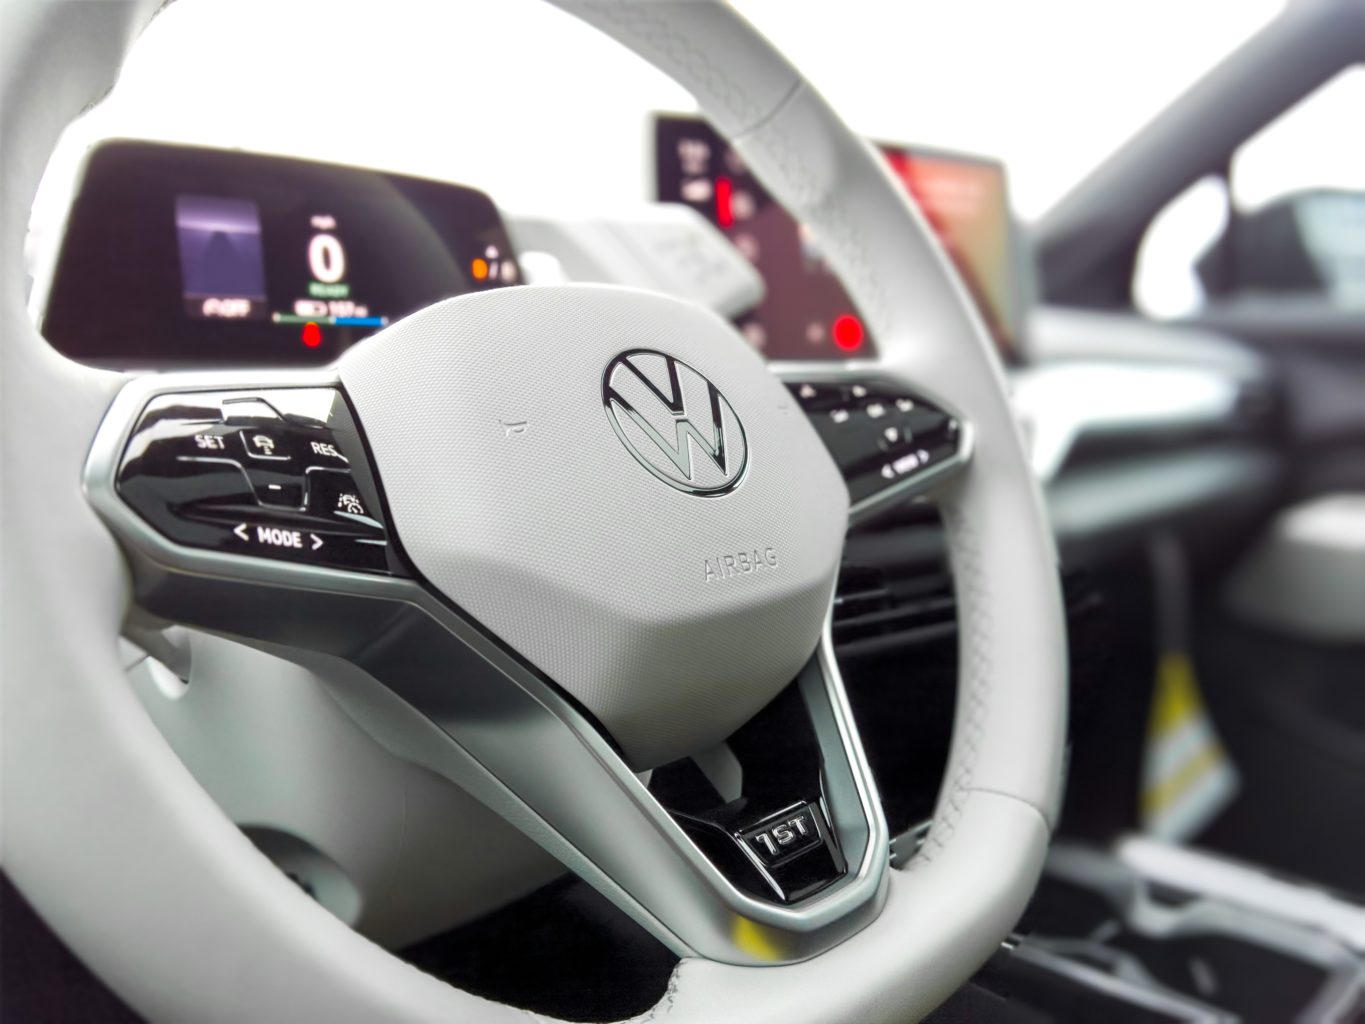 A picture of a Volkswagen steering wheel.